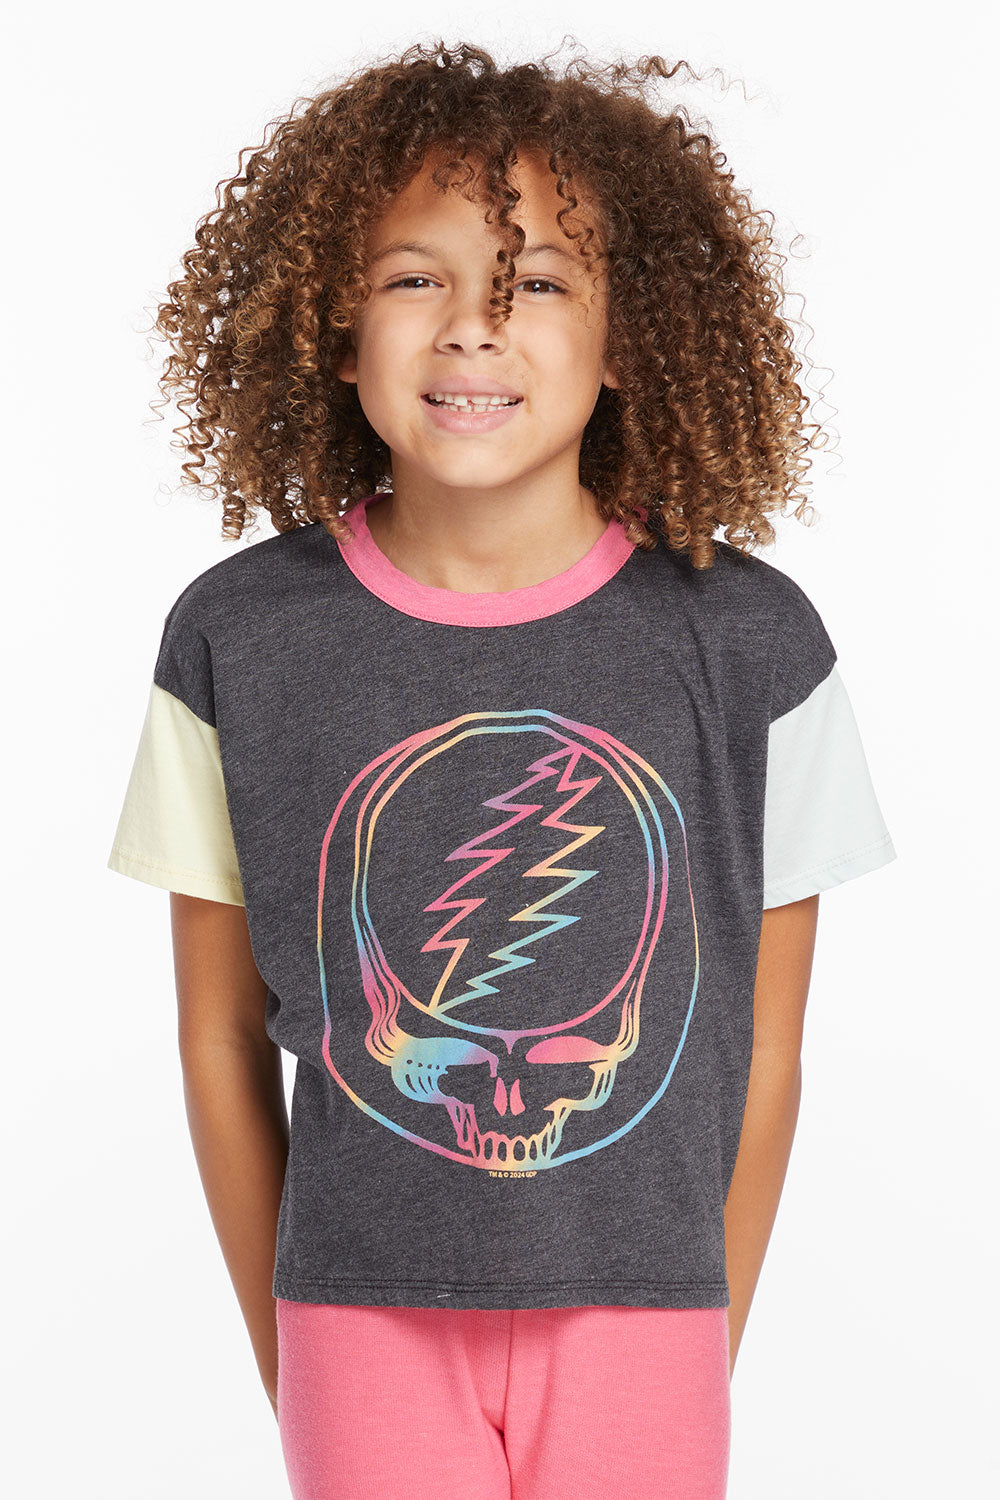 Grateful Dead Steal Your Face Rainbow Girls Tee GIRLS chaserbrand